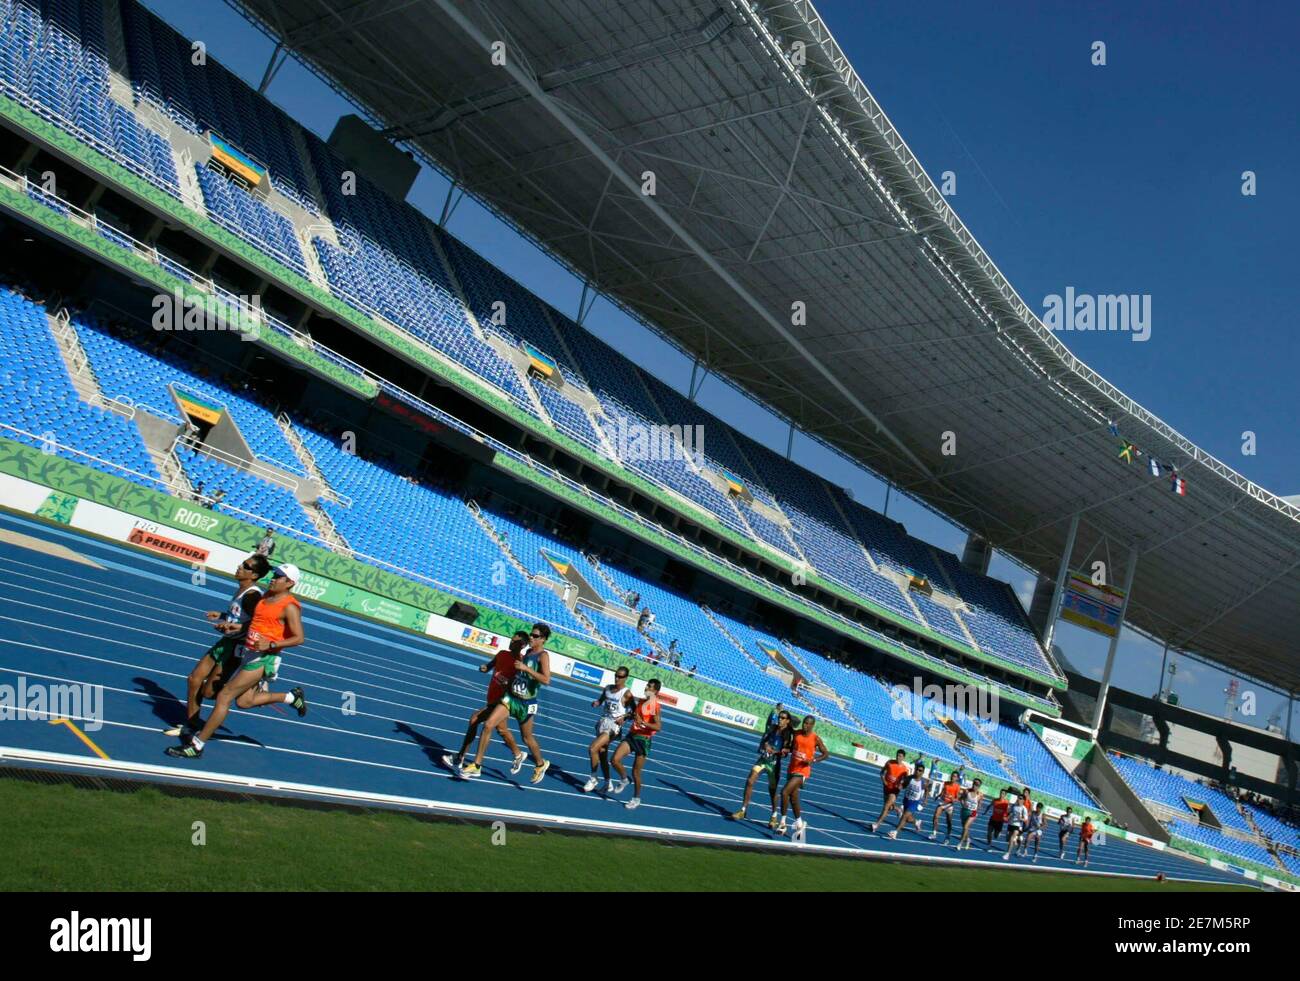 Runners compete in the Men's 5000m T11 final during the Parapan American Games in Rio de Janeiro August 15, 2007.  REUTERS/Bruno Domingos (BRAZIL) Stock Photo